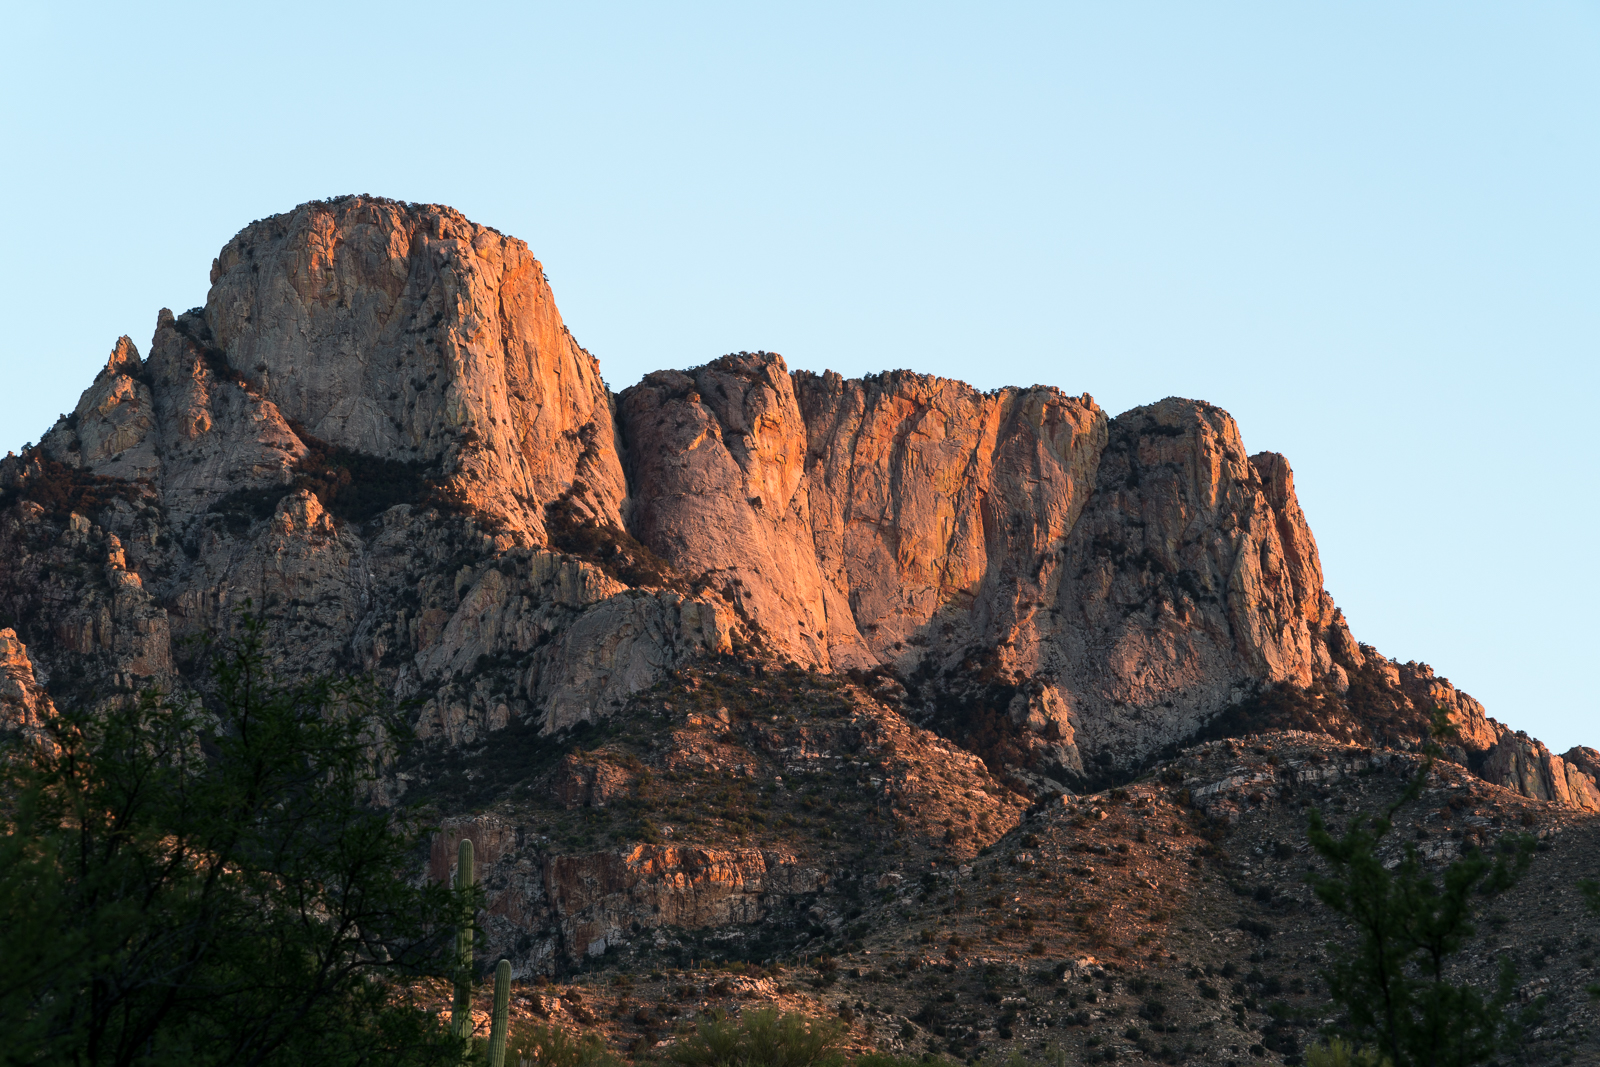 Table Mountain in the sunset from Alamo Canyon - Catalina State Park. April 2016.